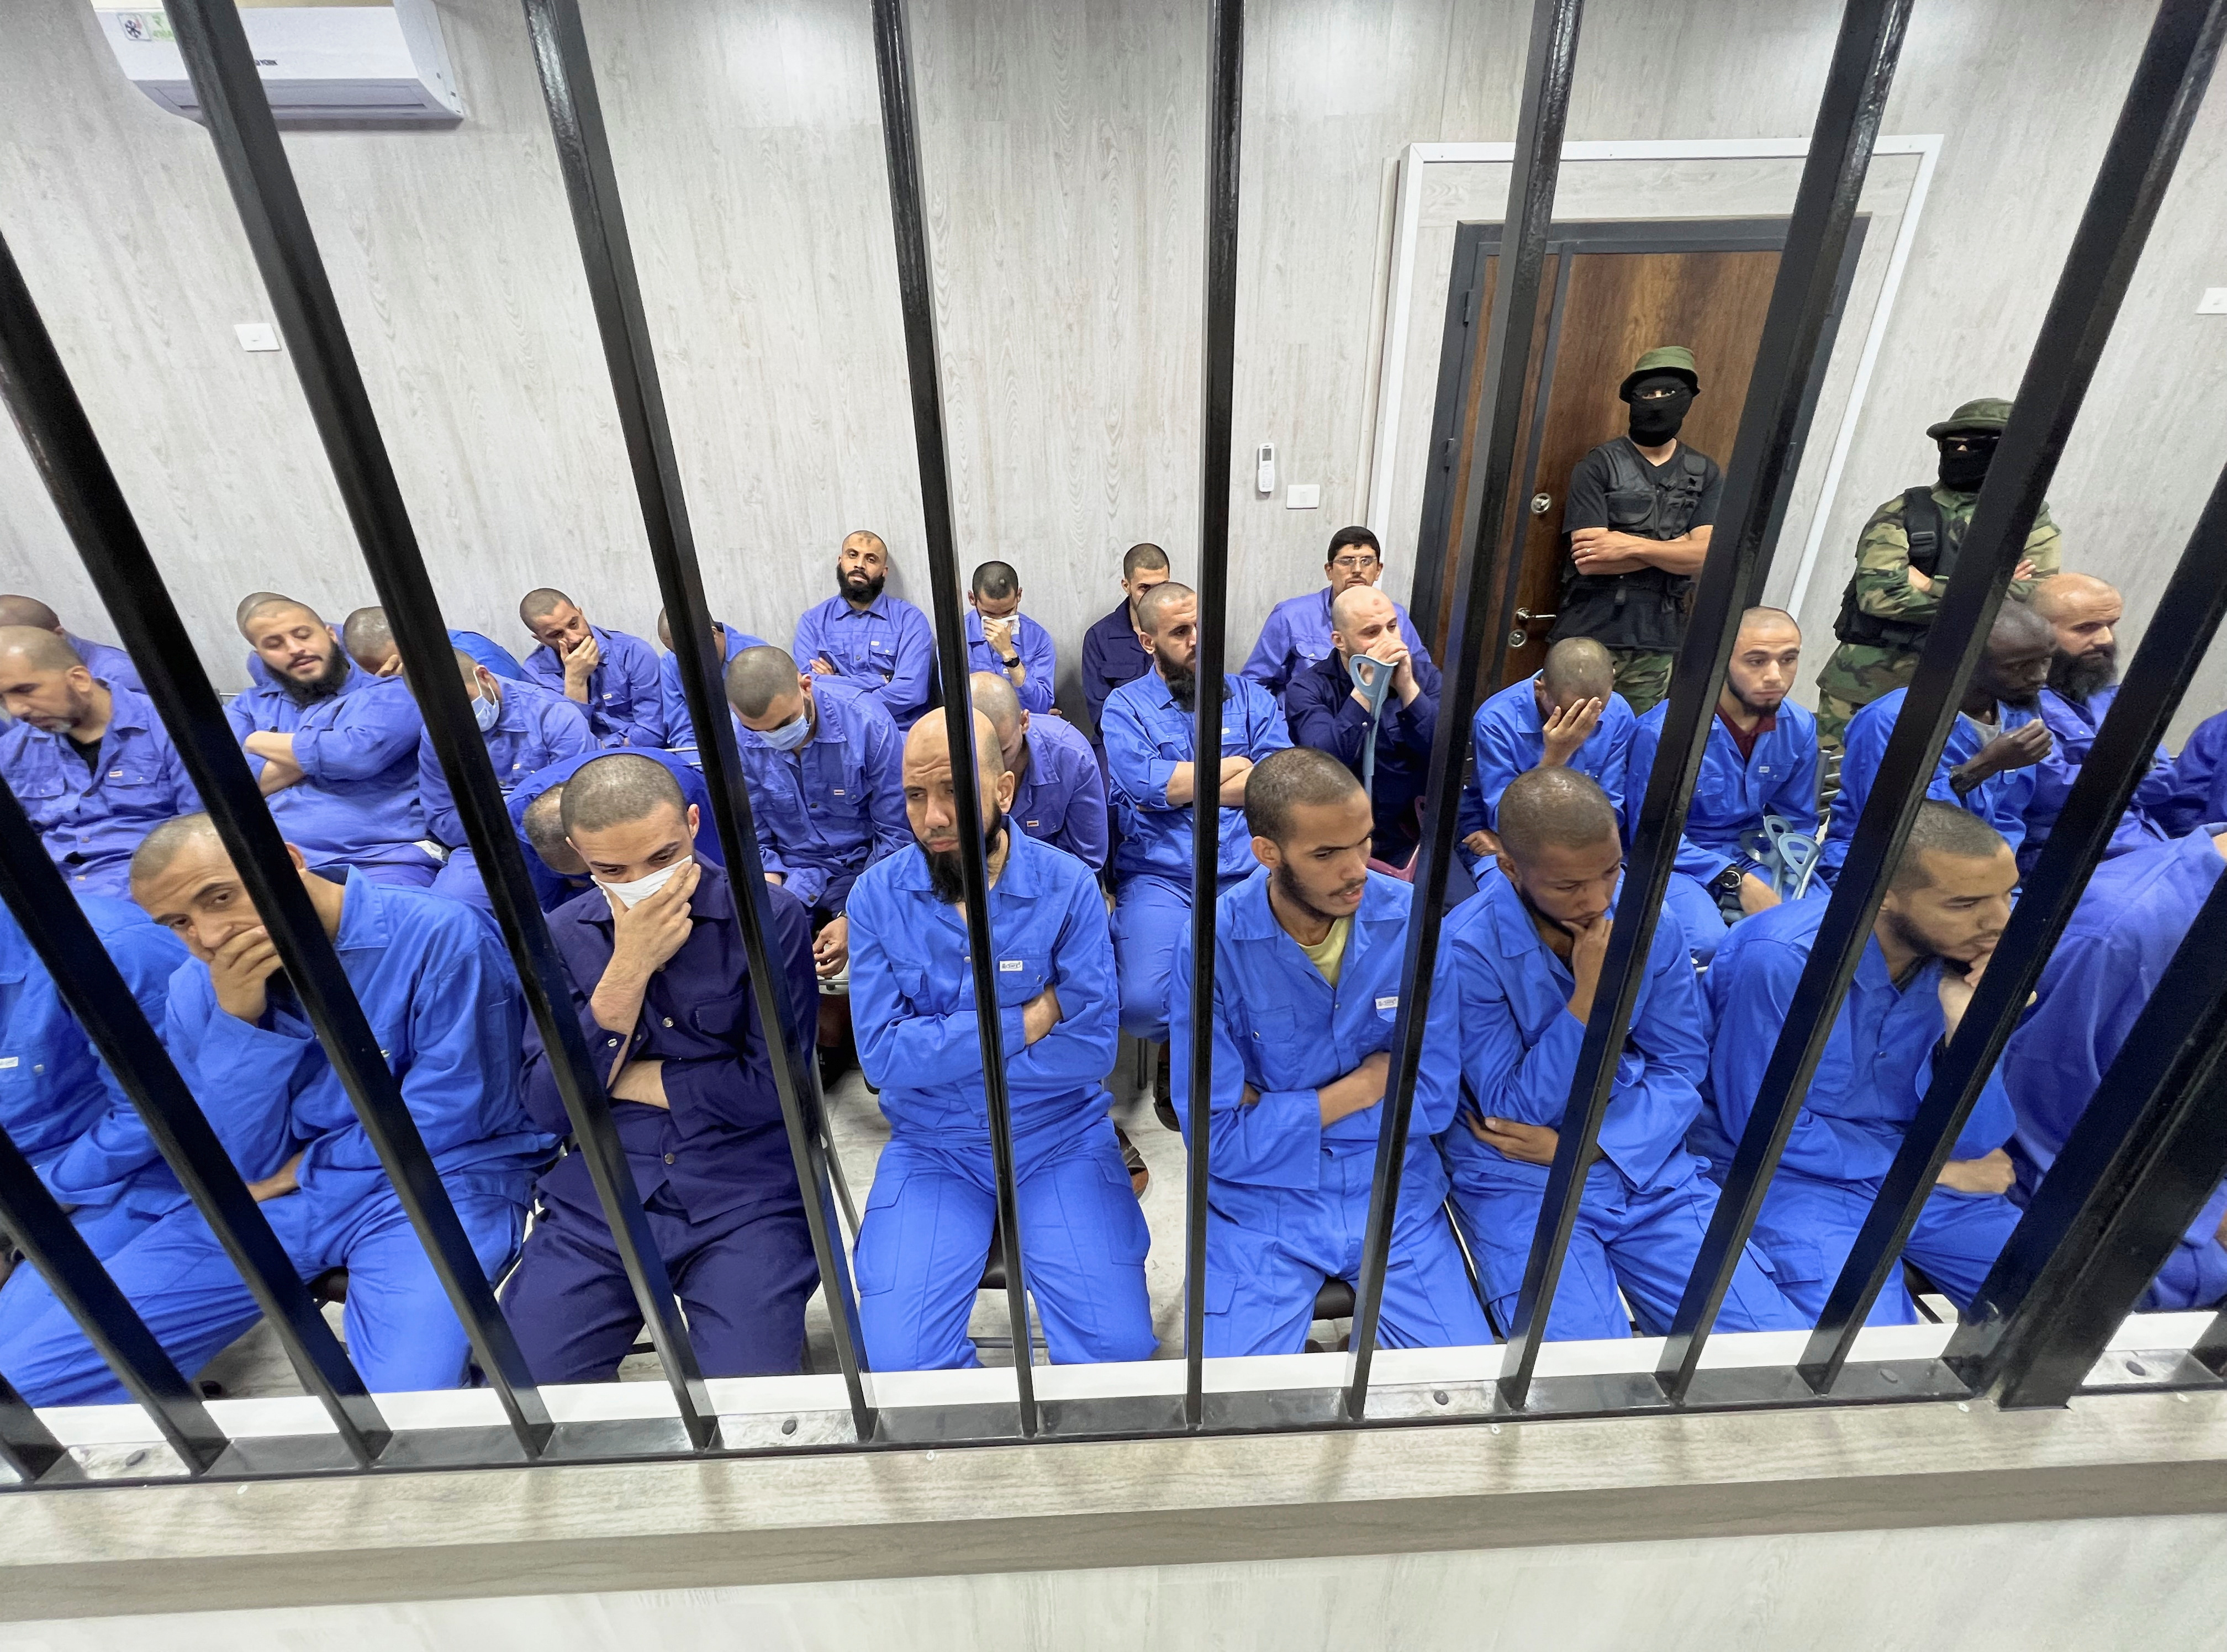 Suspects sit behind bars during a judgment sentence against 56 defendants accused of joining Islamic State group in the court in Misrata